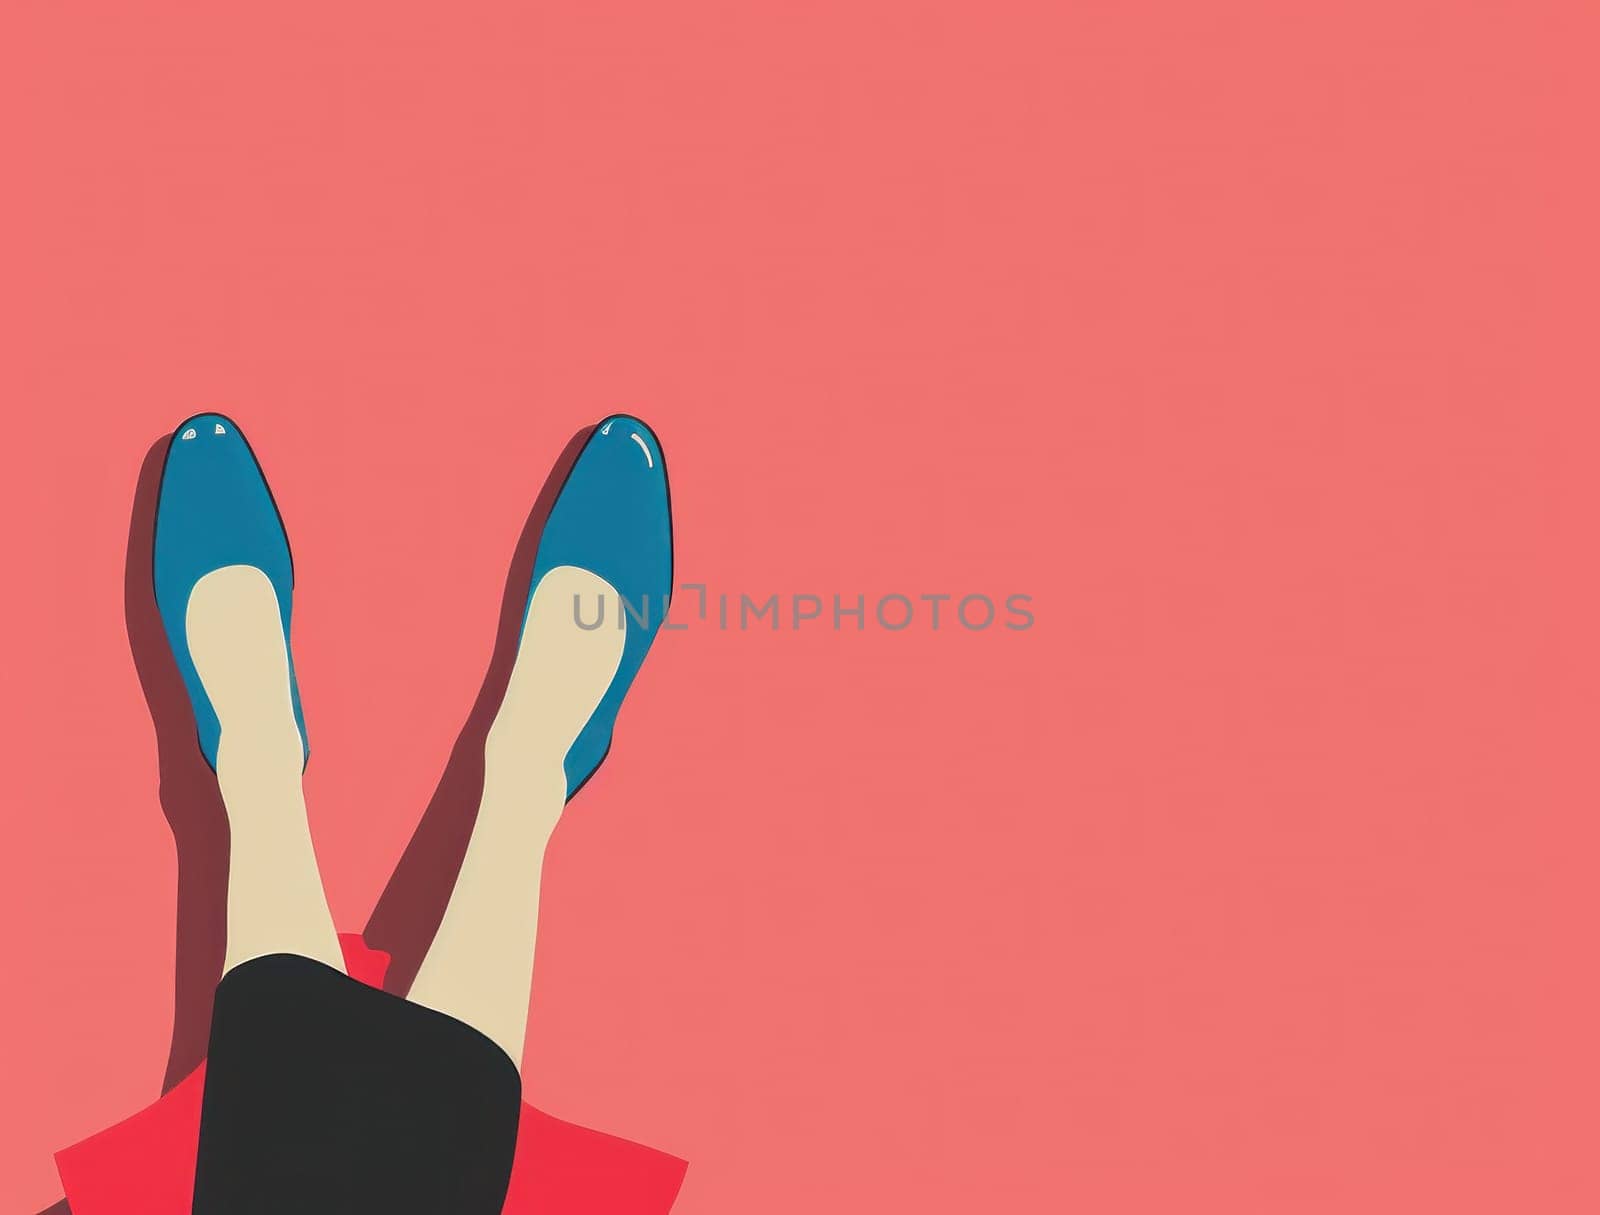 Fashionable legs in blue shoes on bright red and pink background, stylish and trendy concept for beauty and fashion industry